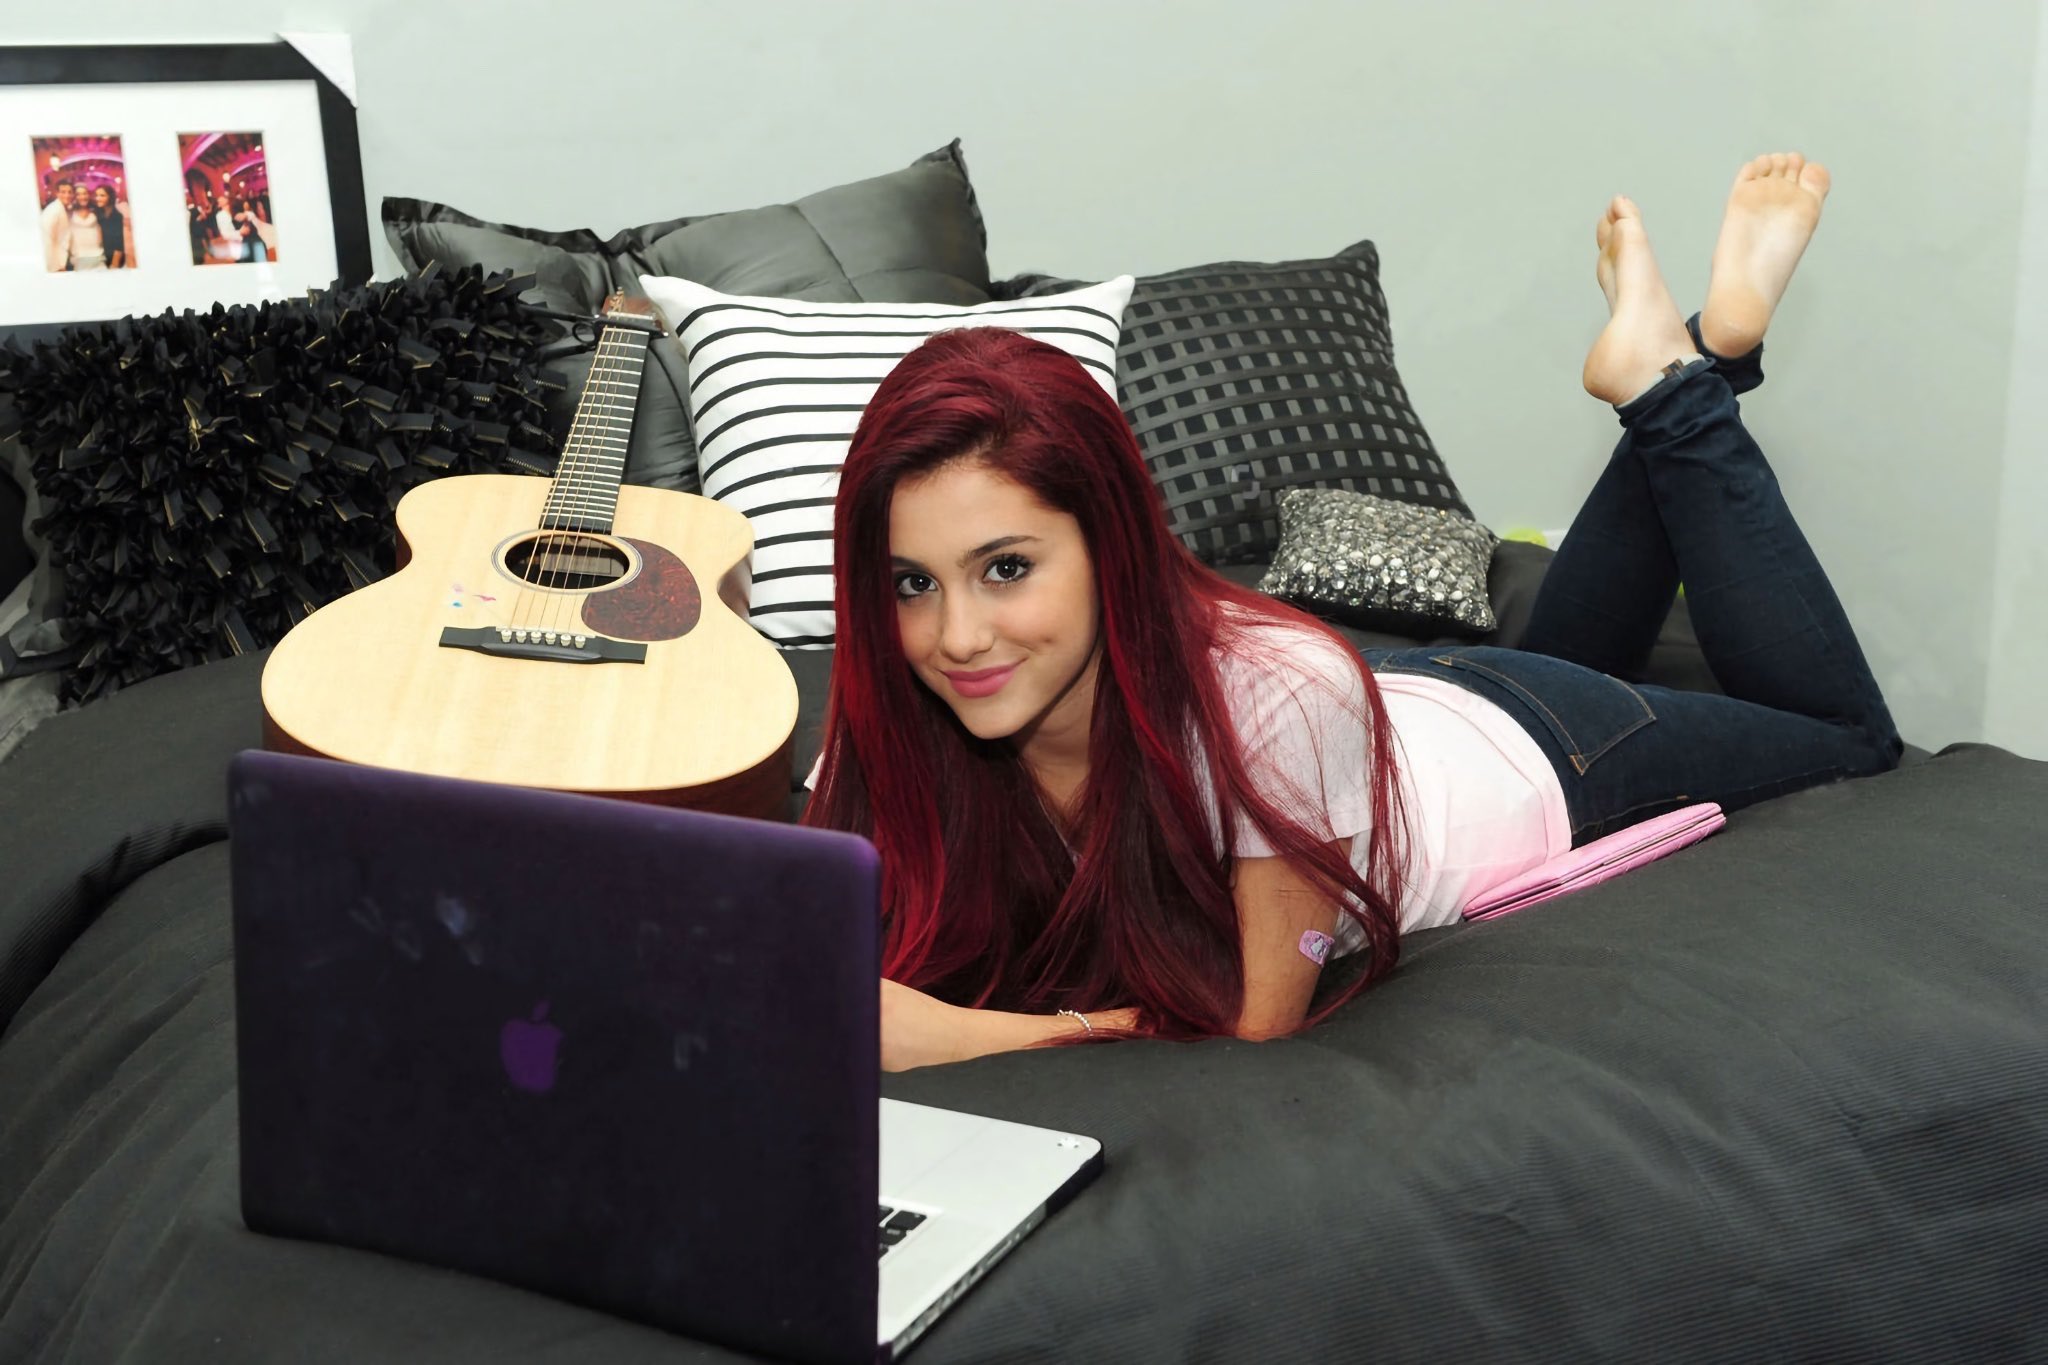 “#13 Ariana Grande and her perfect feet” .